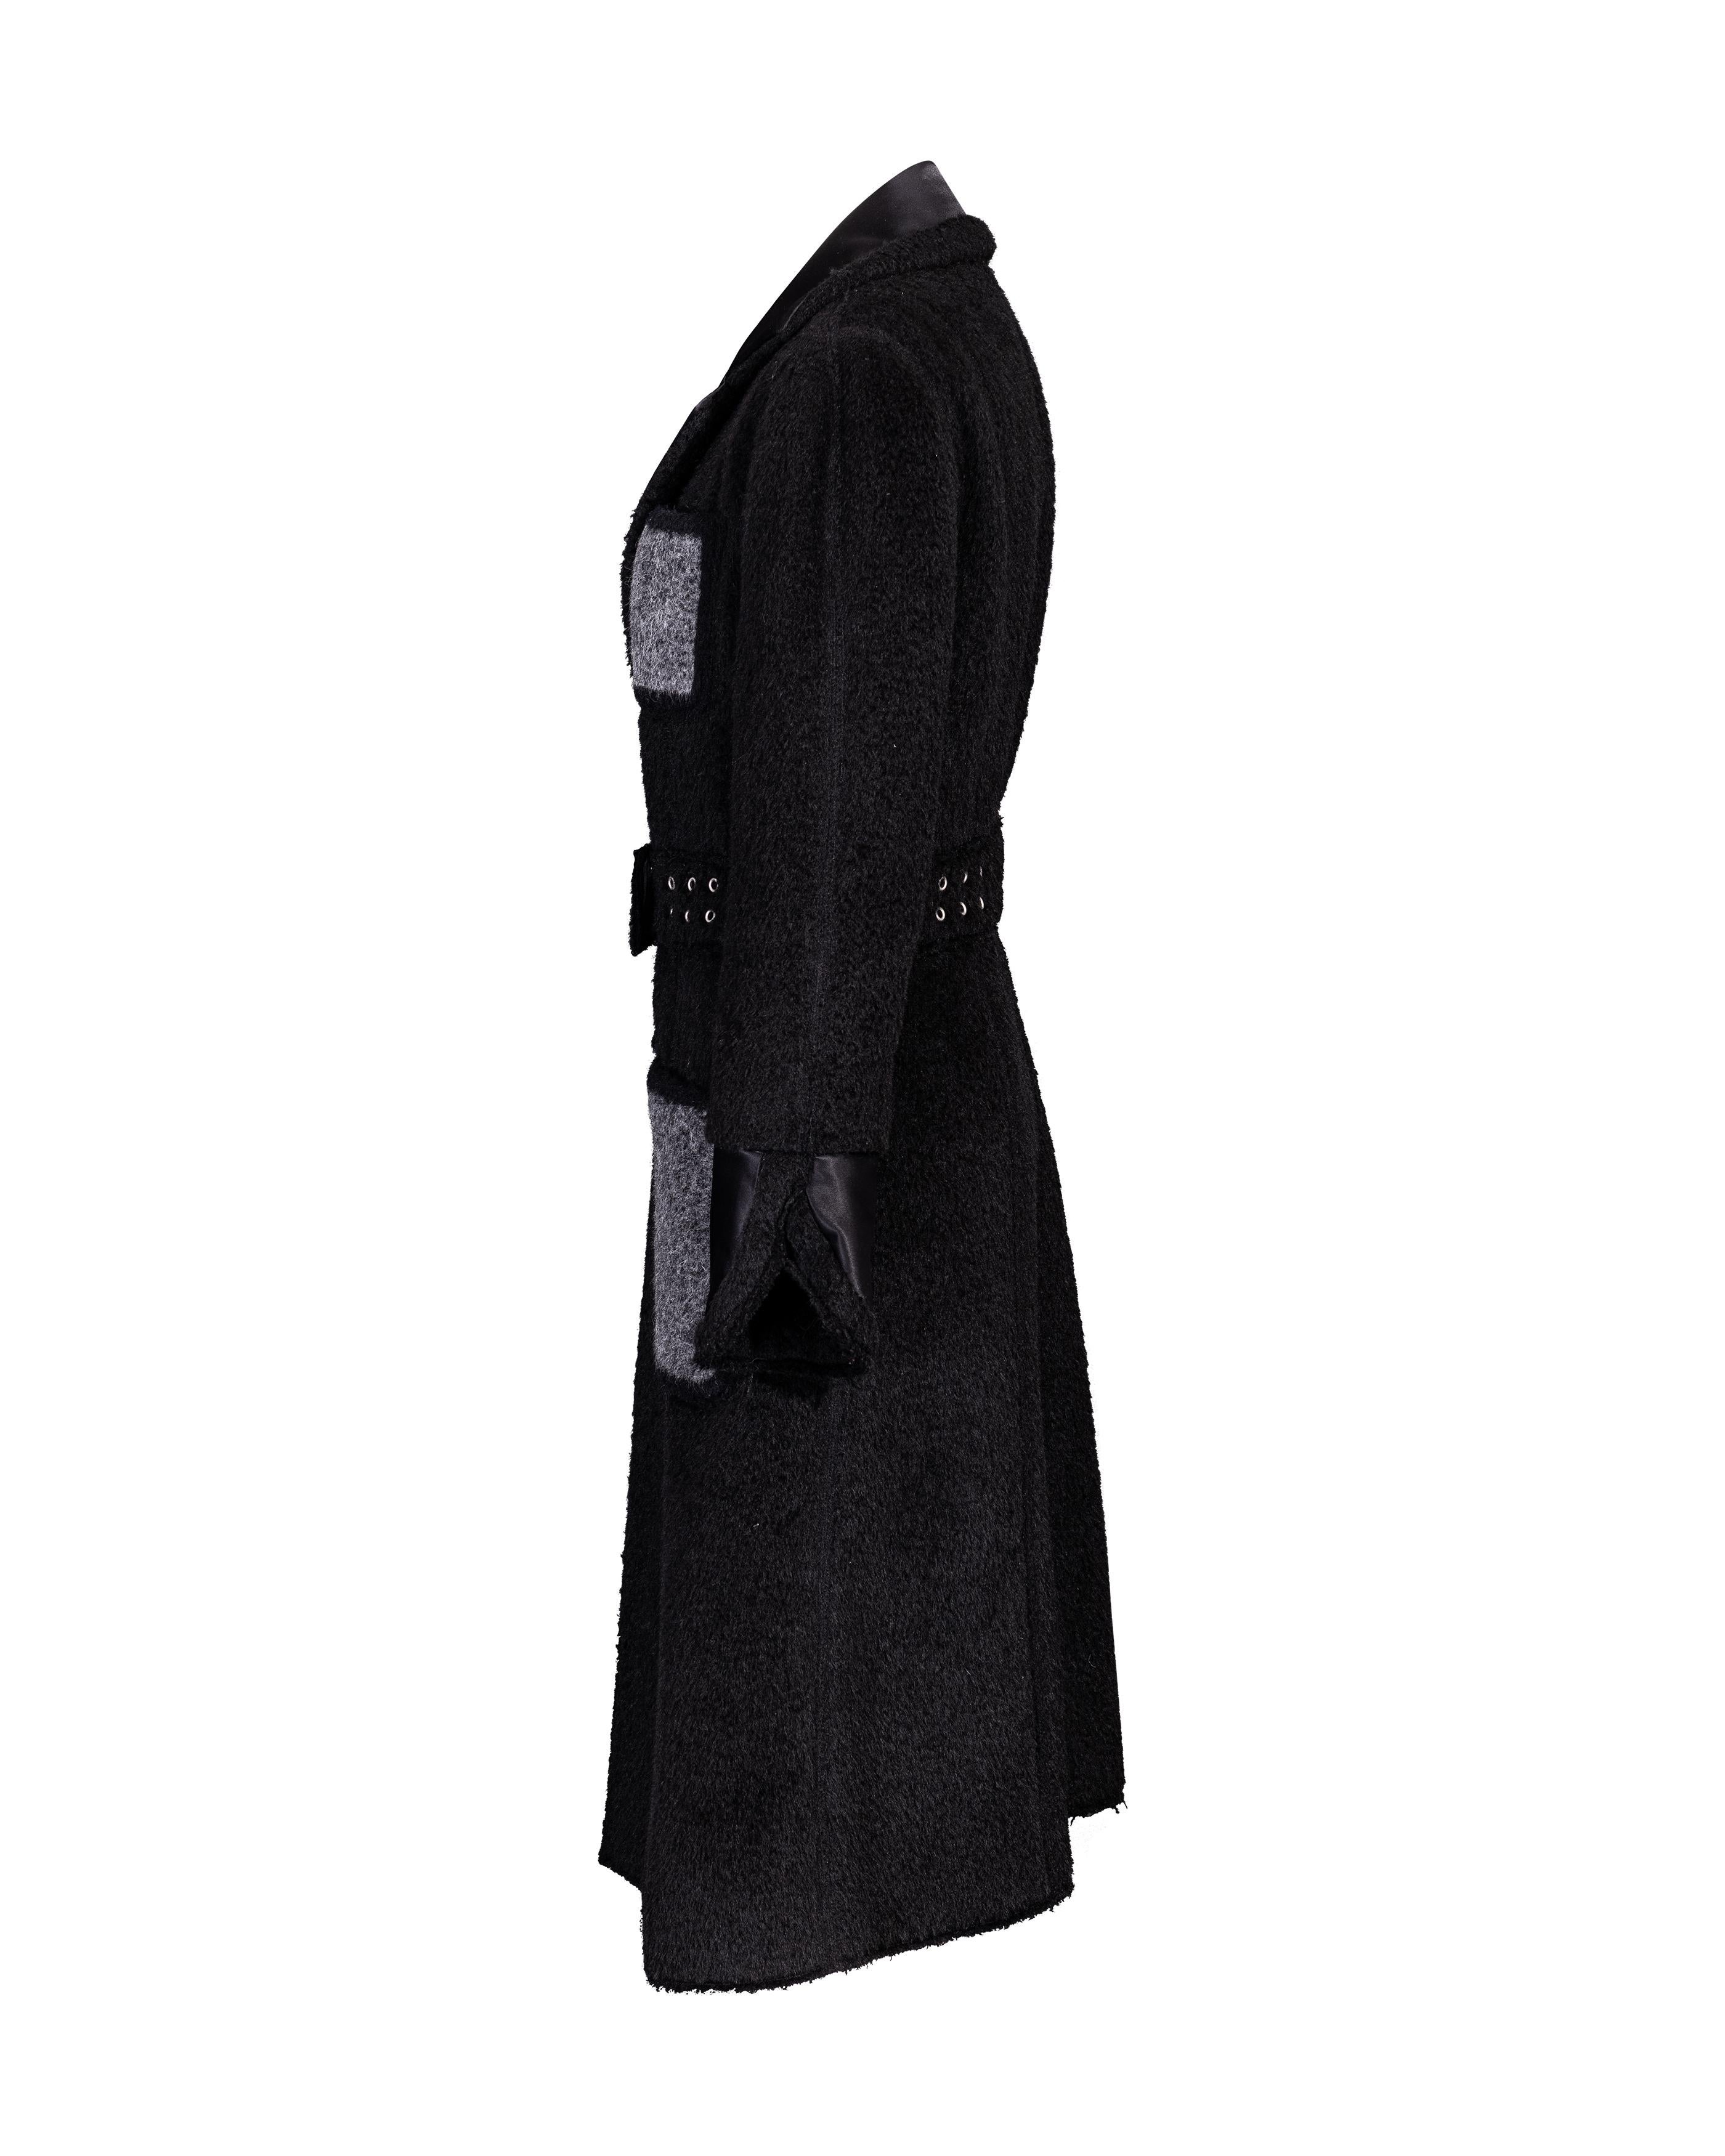 Pre-Fall 2014 Céline by Phoebe Philo Black Shearling Coat with Gray Accents In Excellent Condition For Sale In North Hollywood, CA